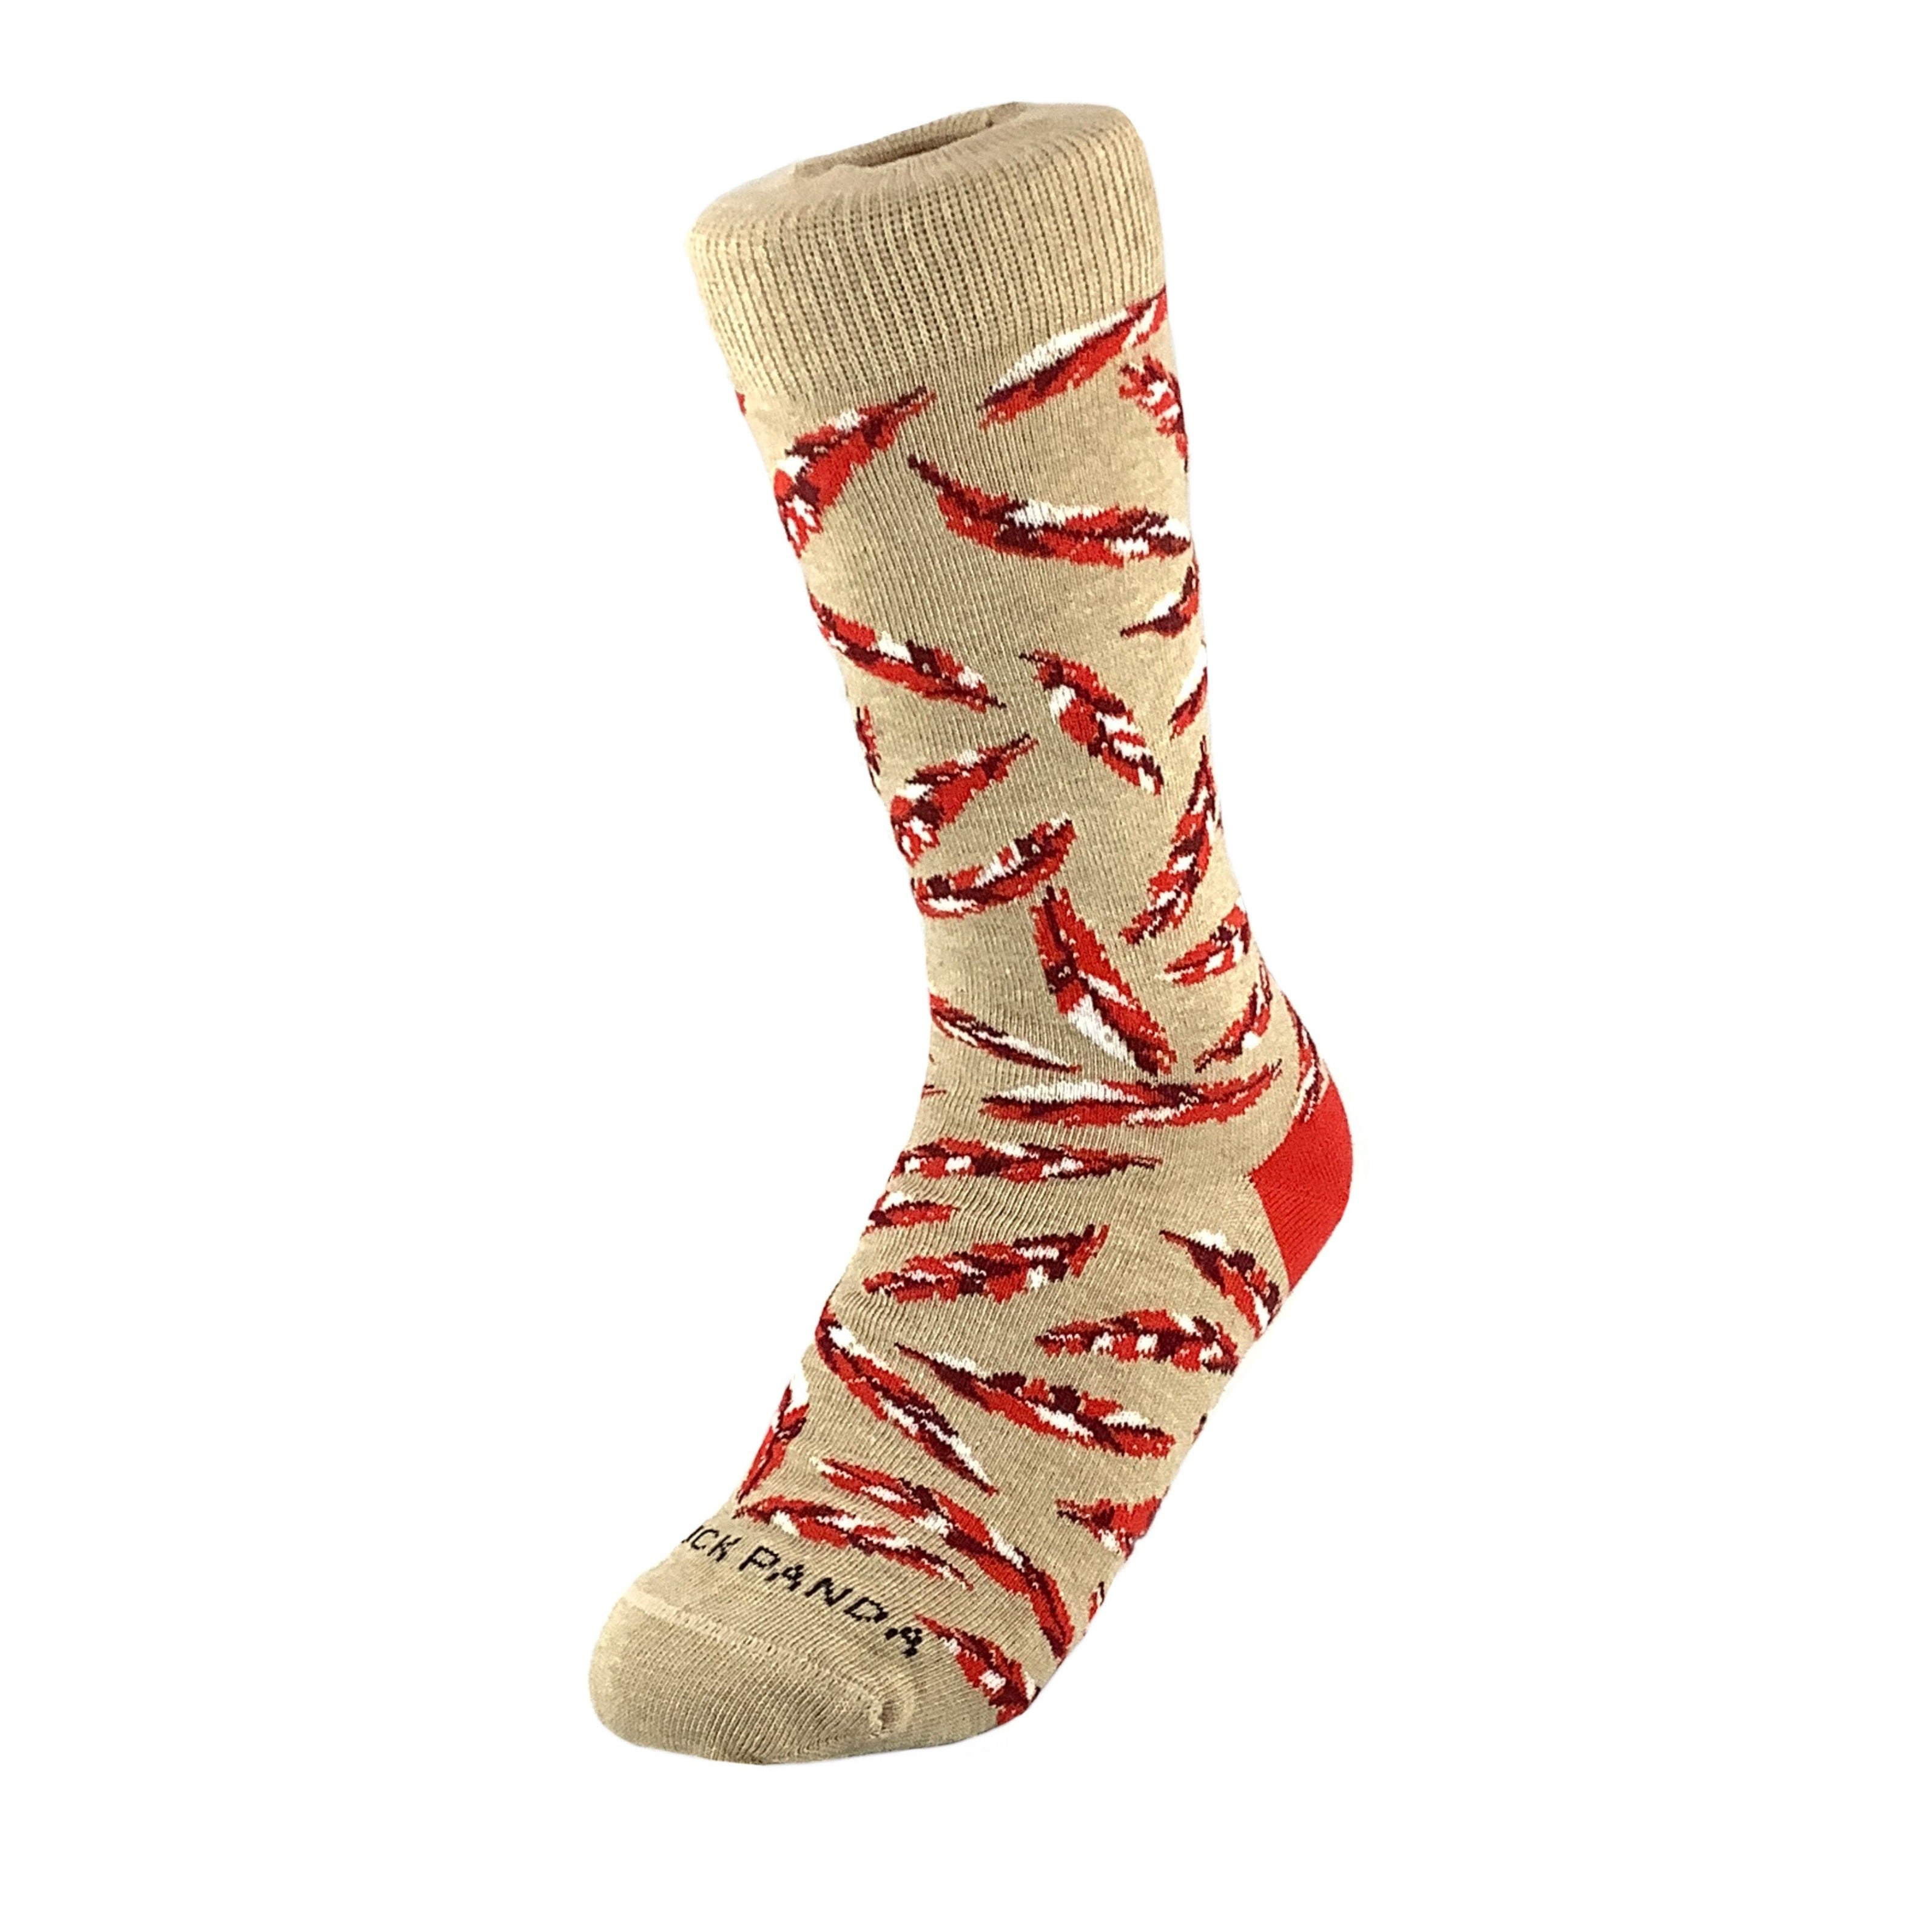 Feather Pattern Socks from the Sock Panda (Adult Small)